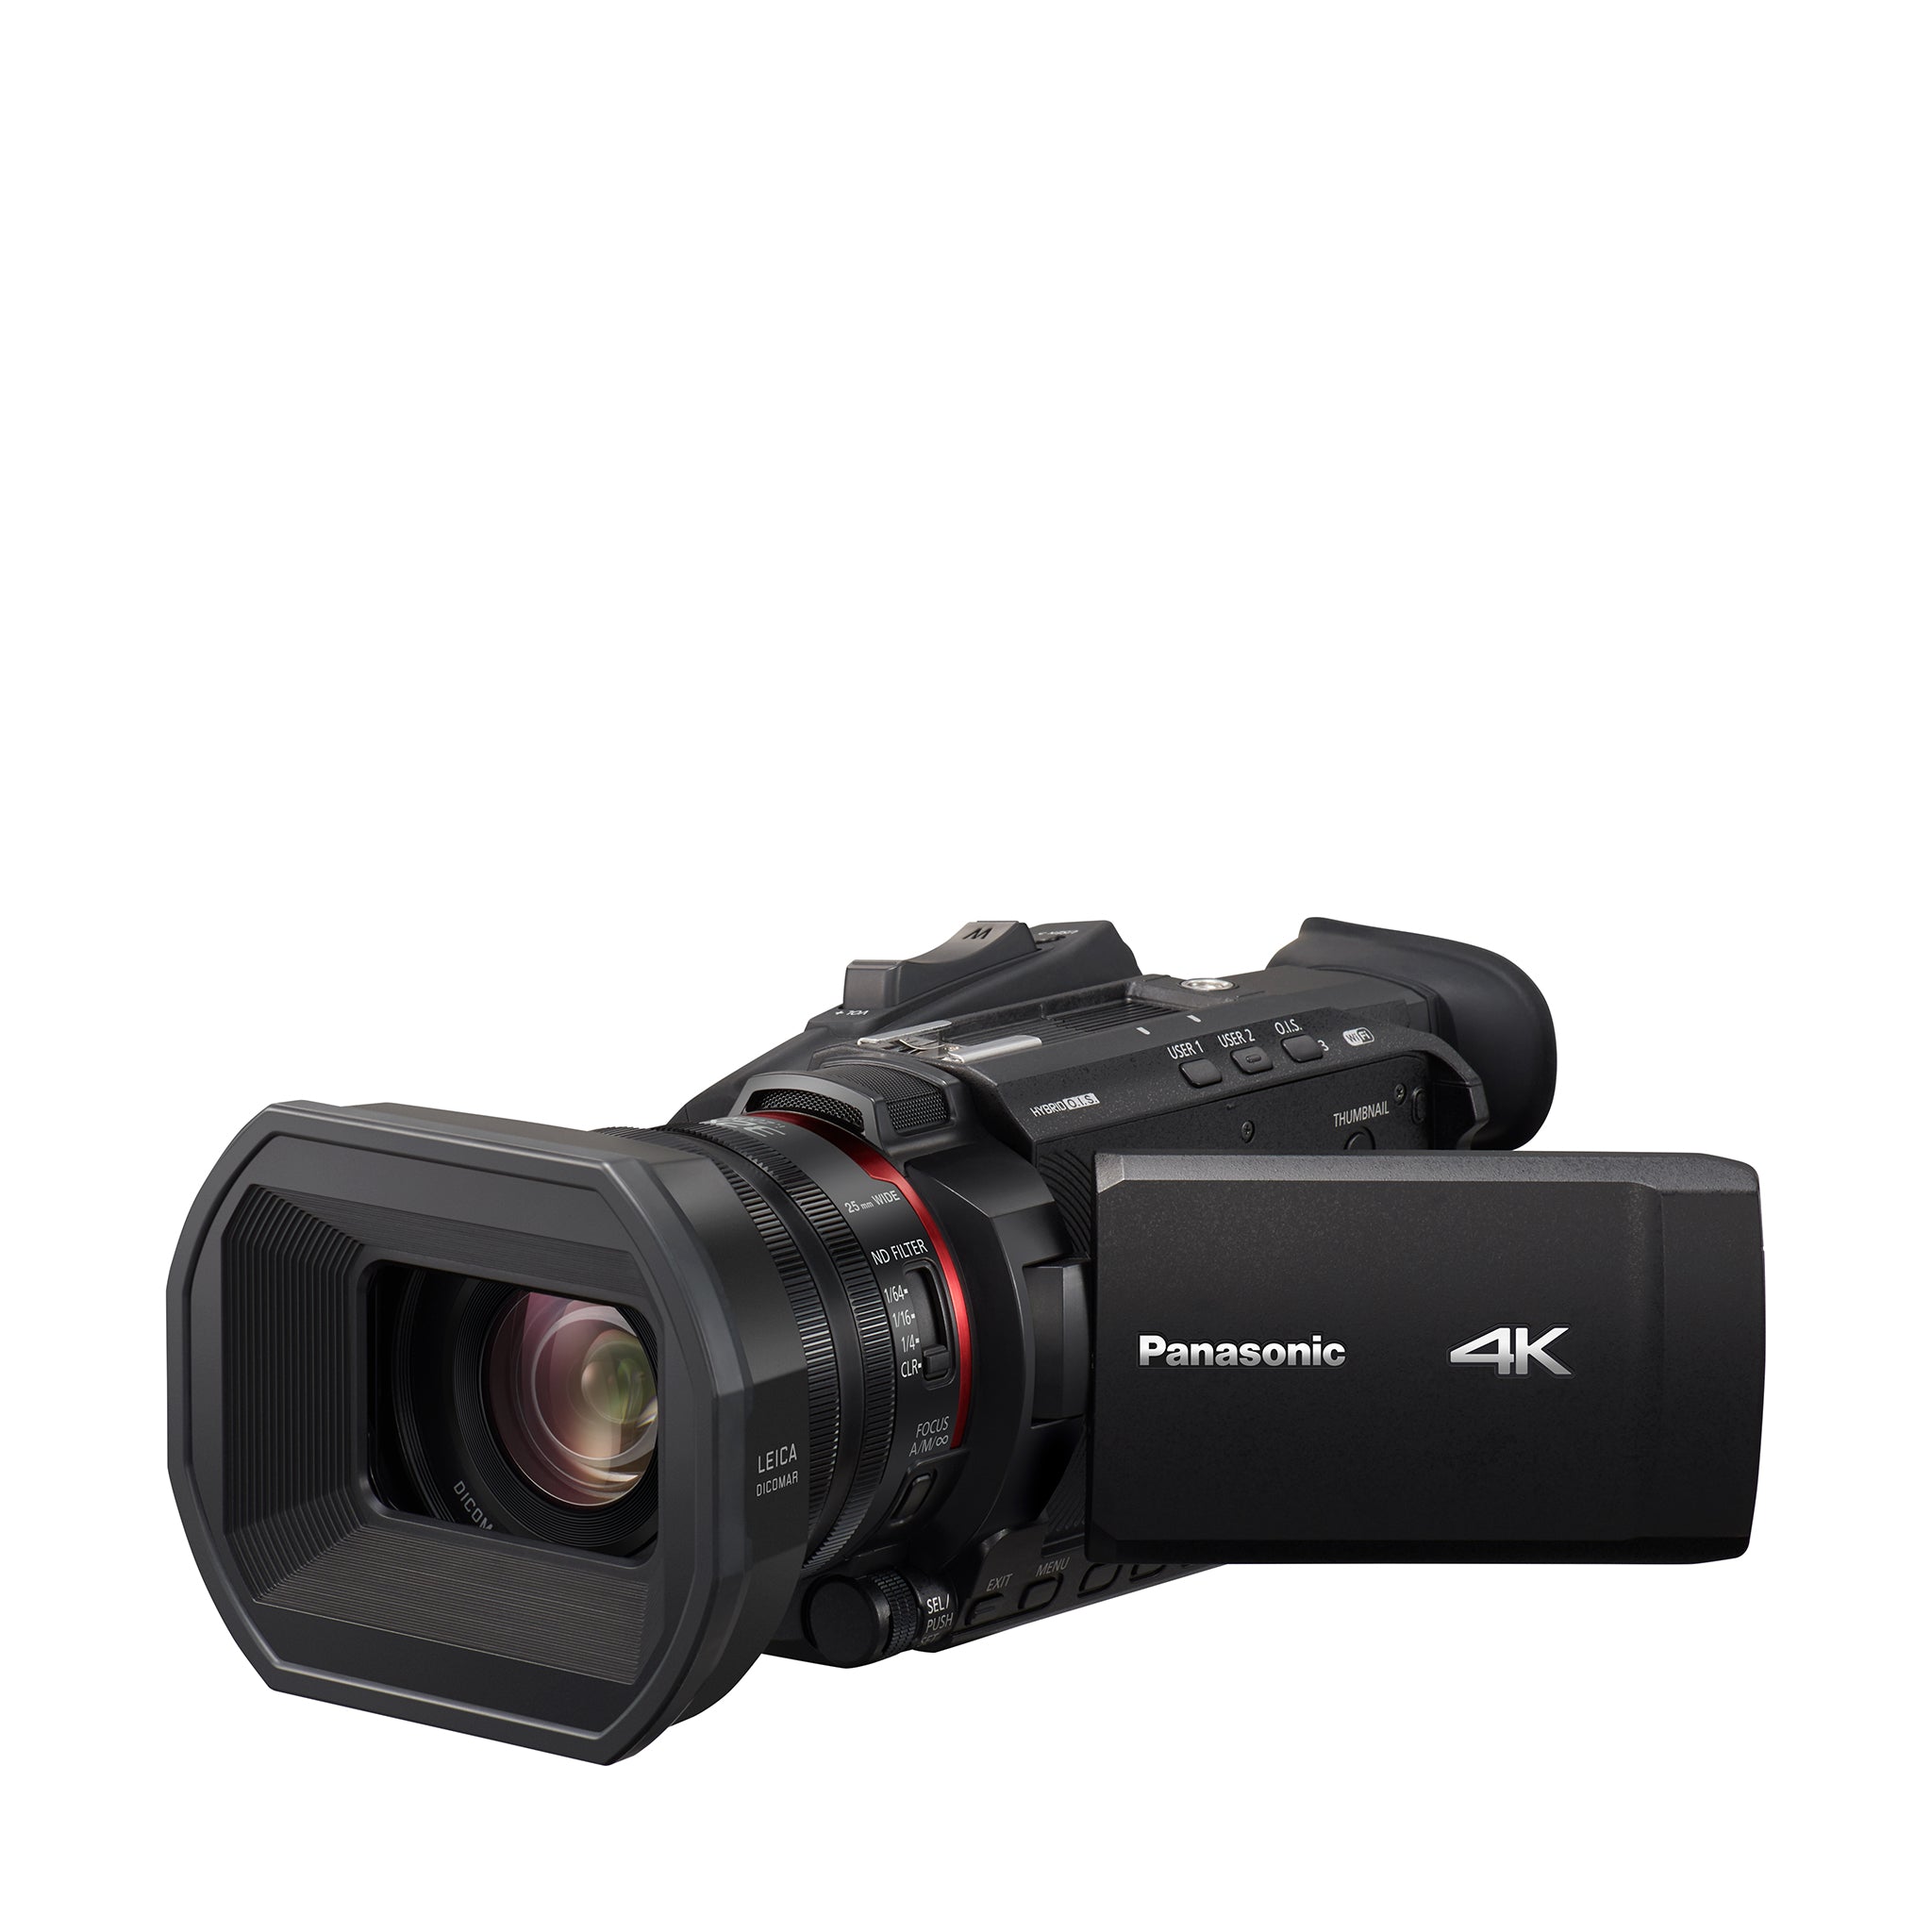 Panasonic 4K Professional Camcorder with 24X Optical Zoom and 